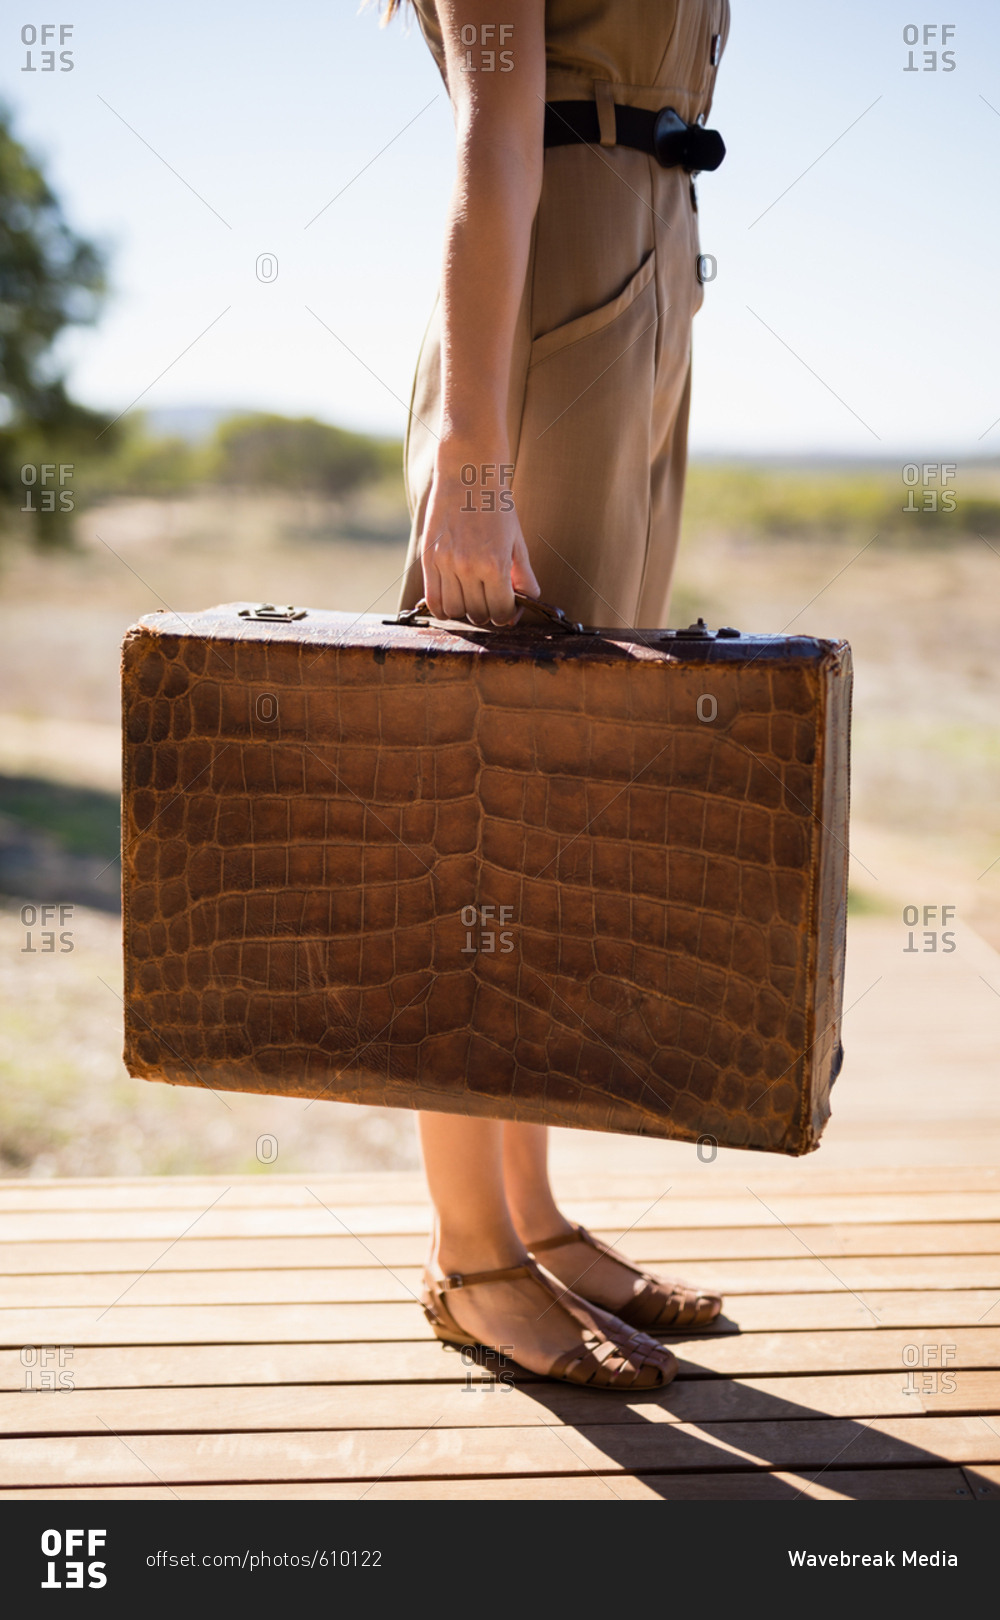 Woman with suitcase standing on deck on a sunny day during safari vacation